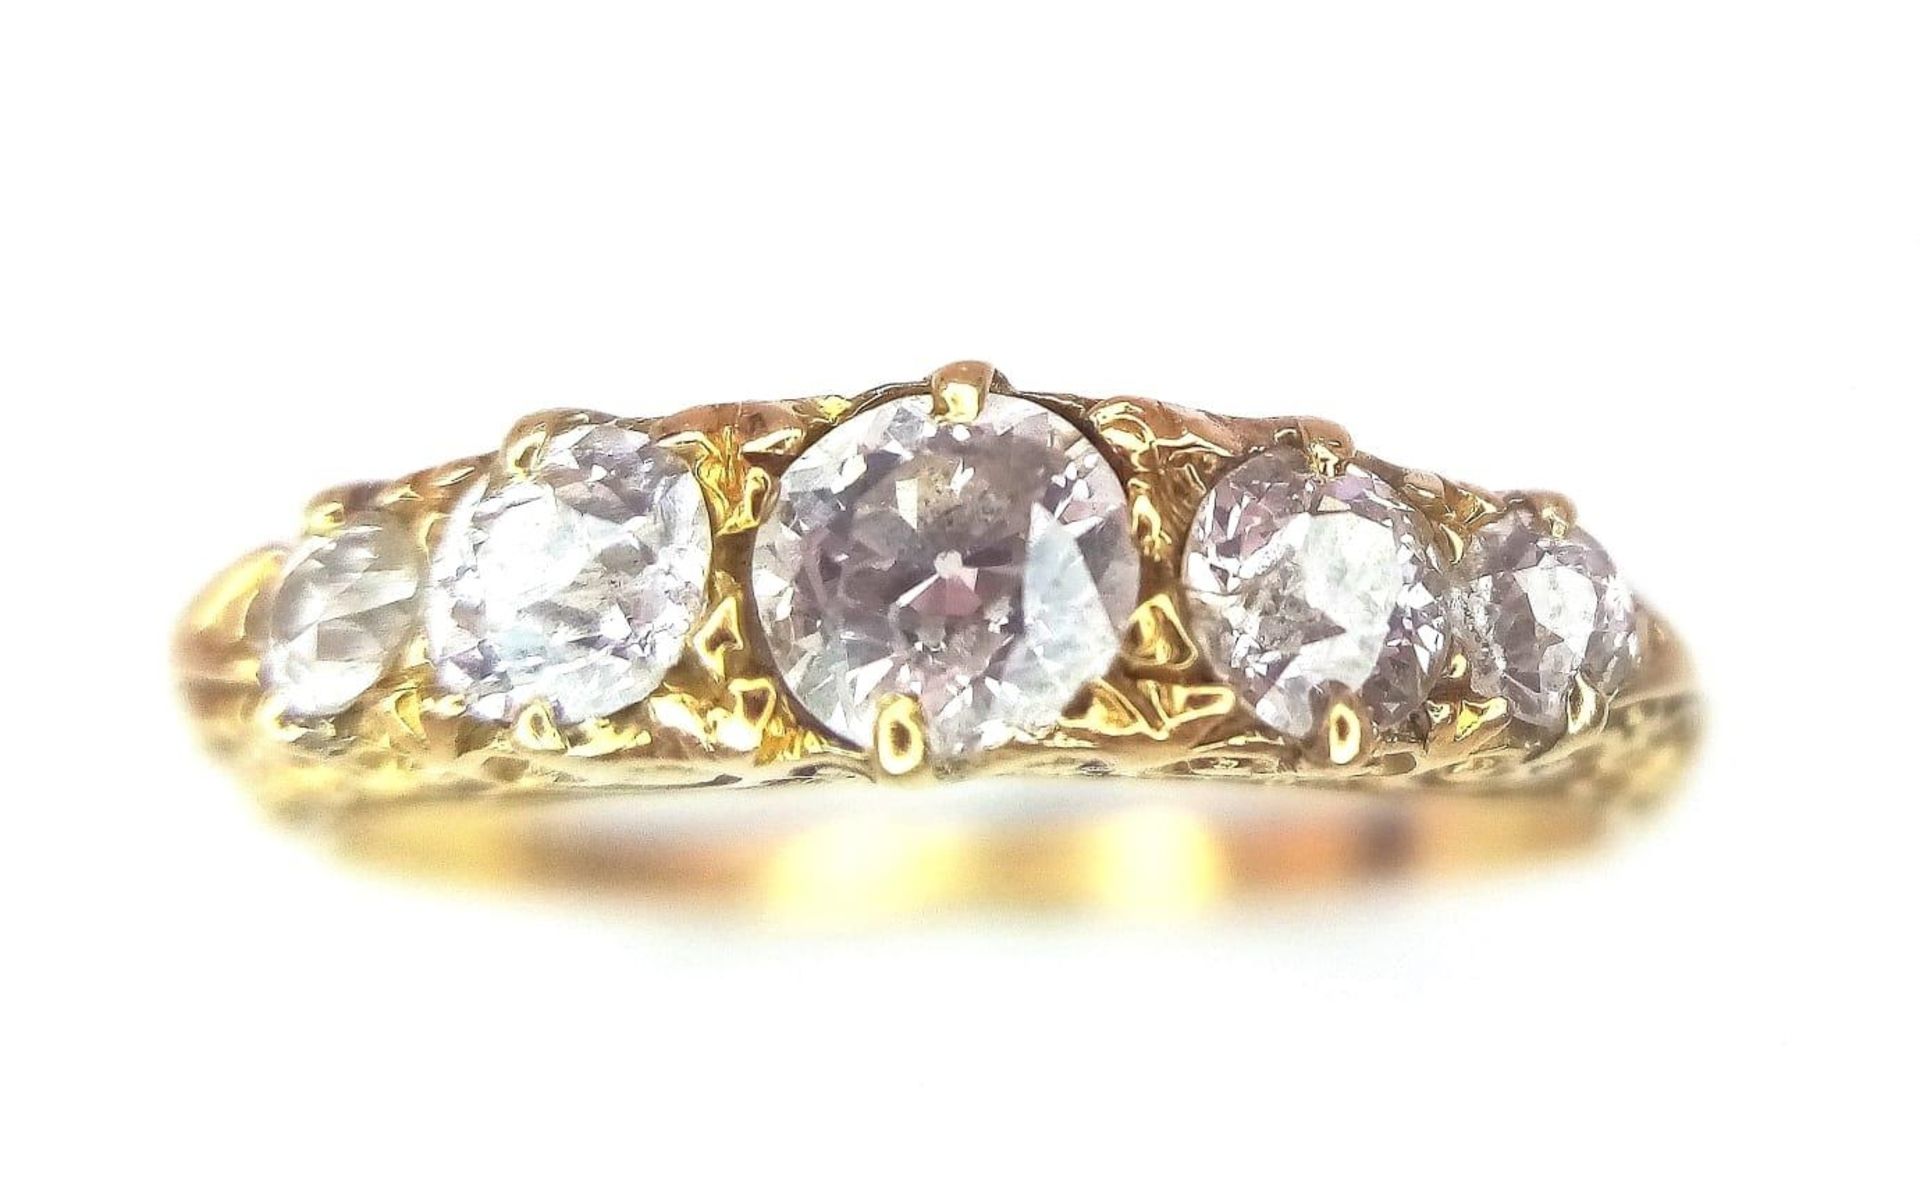 AN ANTIQUE 18K YELOW GOLD DIAMOND 5 STONE SET RING, WITH APPROX 0.60CT OLD CUT DIAMONDS, WEIGHT 2.5G - Image 6 of 13